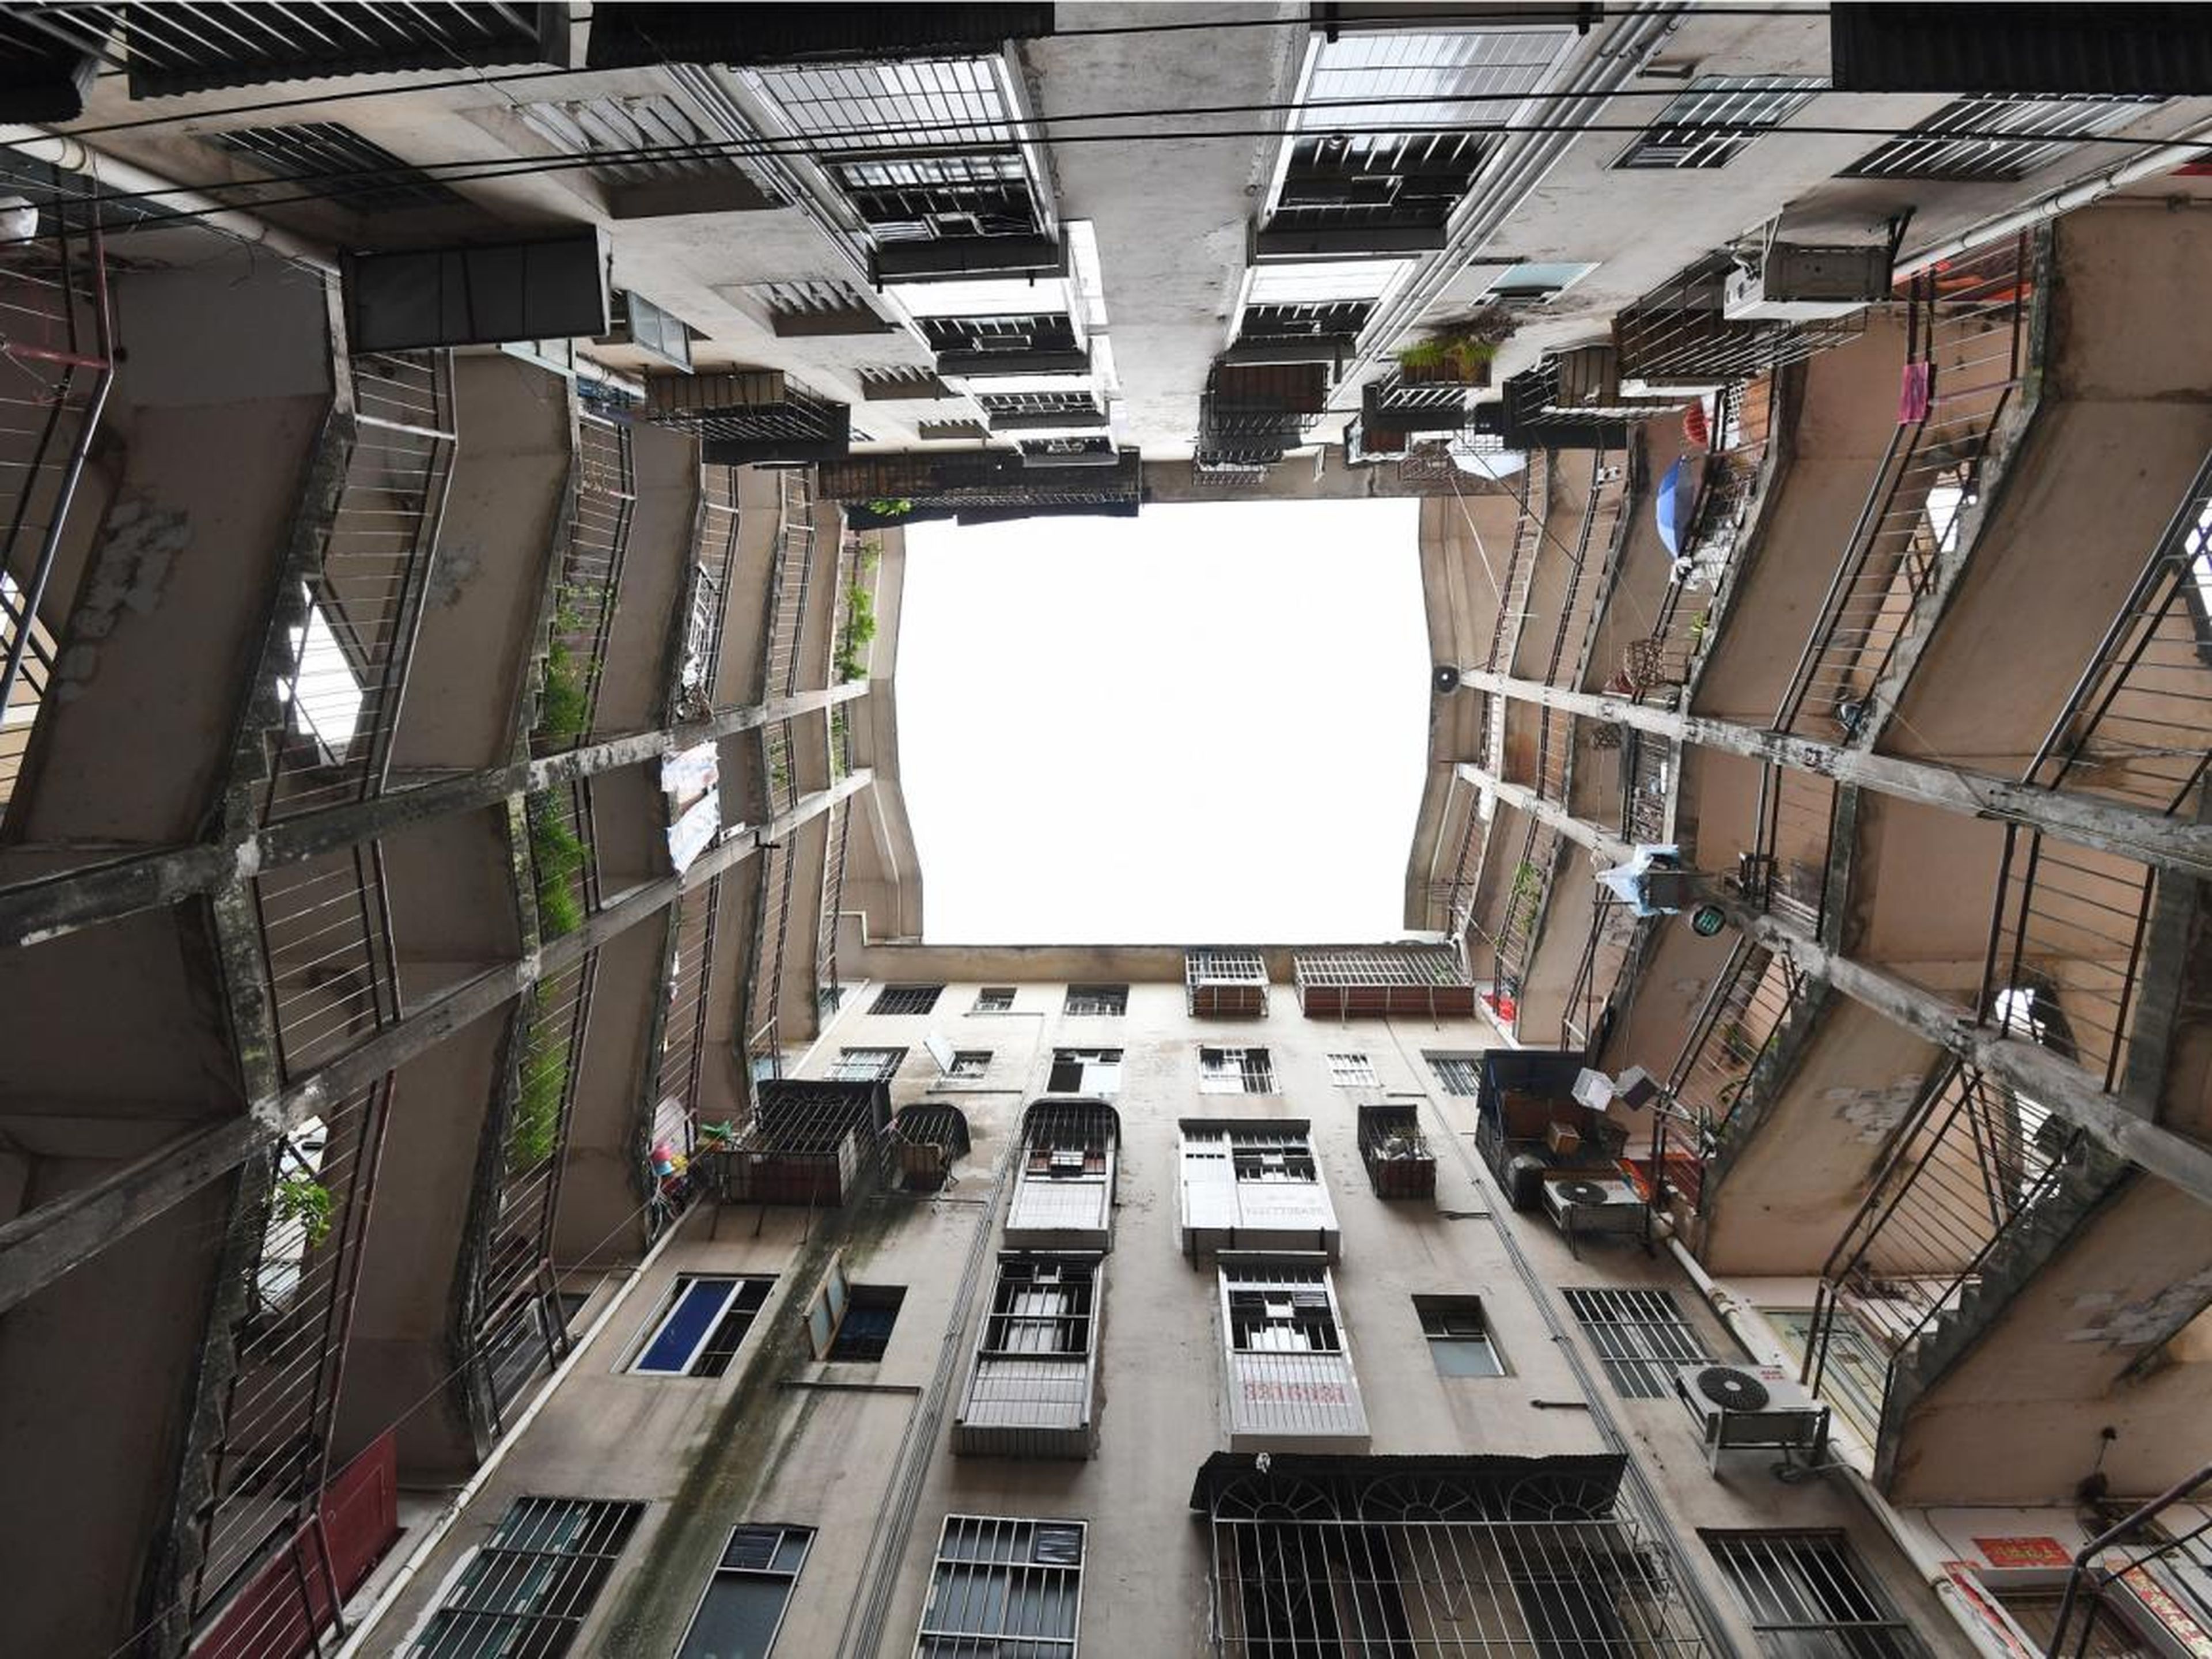 Two buildings share a stairwell at a residential area on October 11, 2018 in Nanning, Guangxi Zhuang Autonomous Region of China.